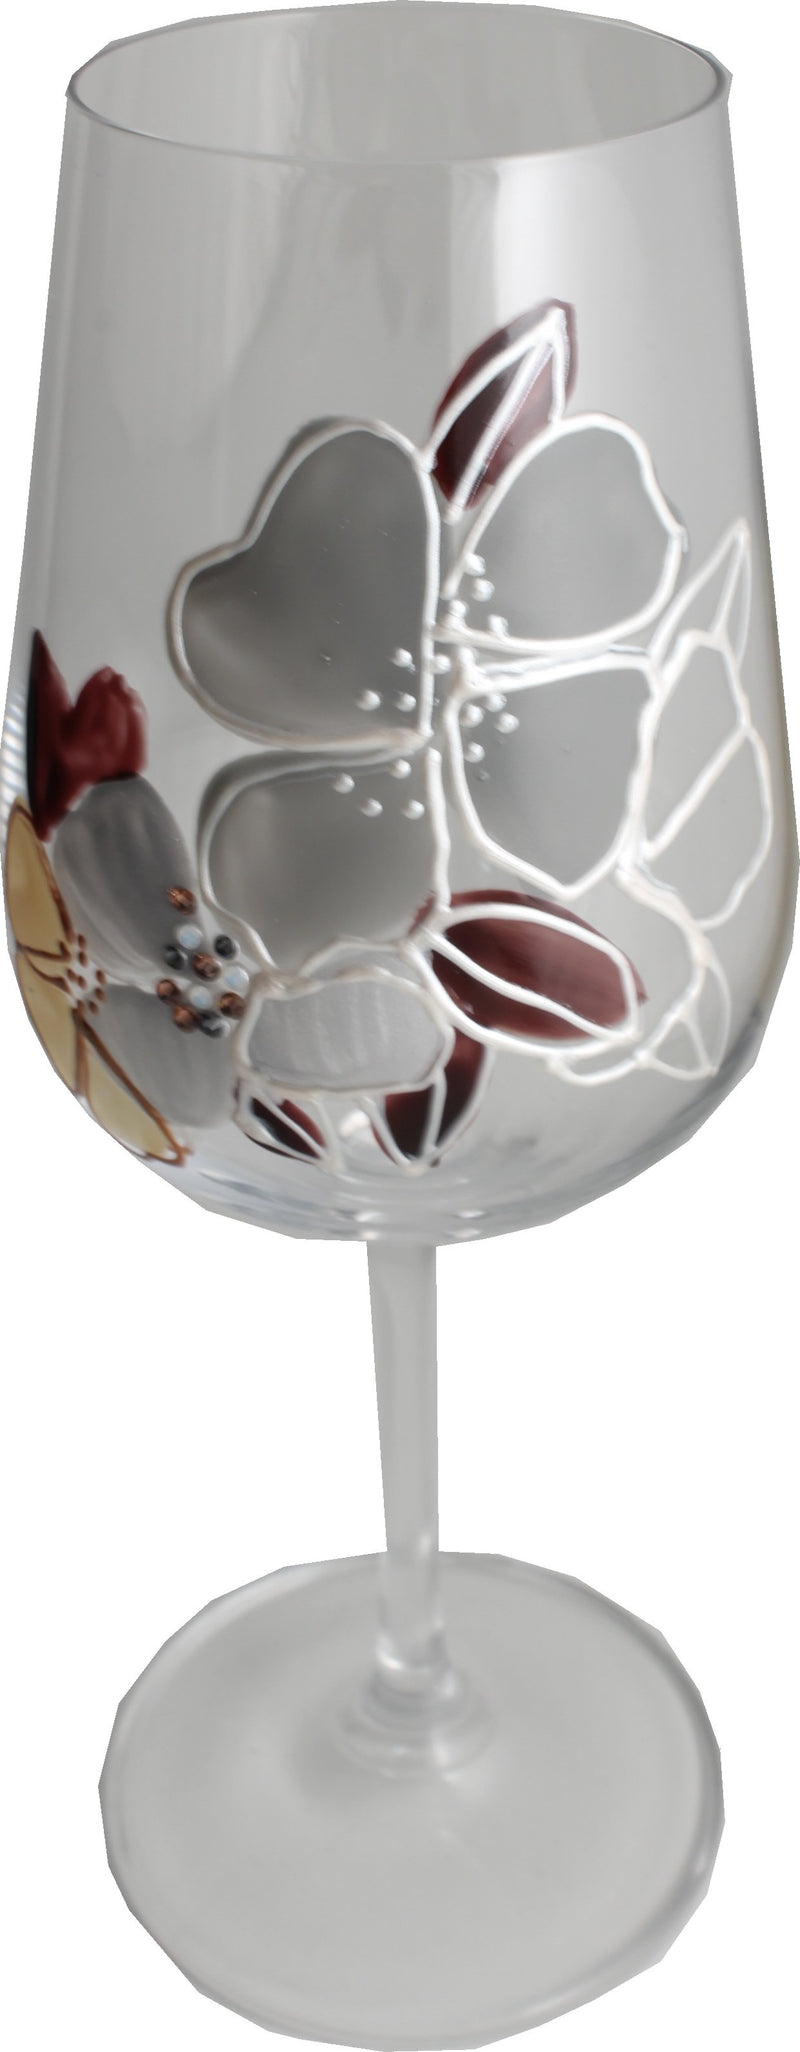 Wine Glass Titanium Crystal Luxury with Crystals